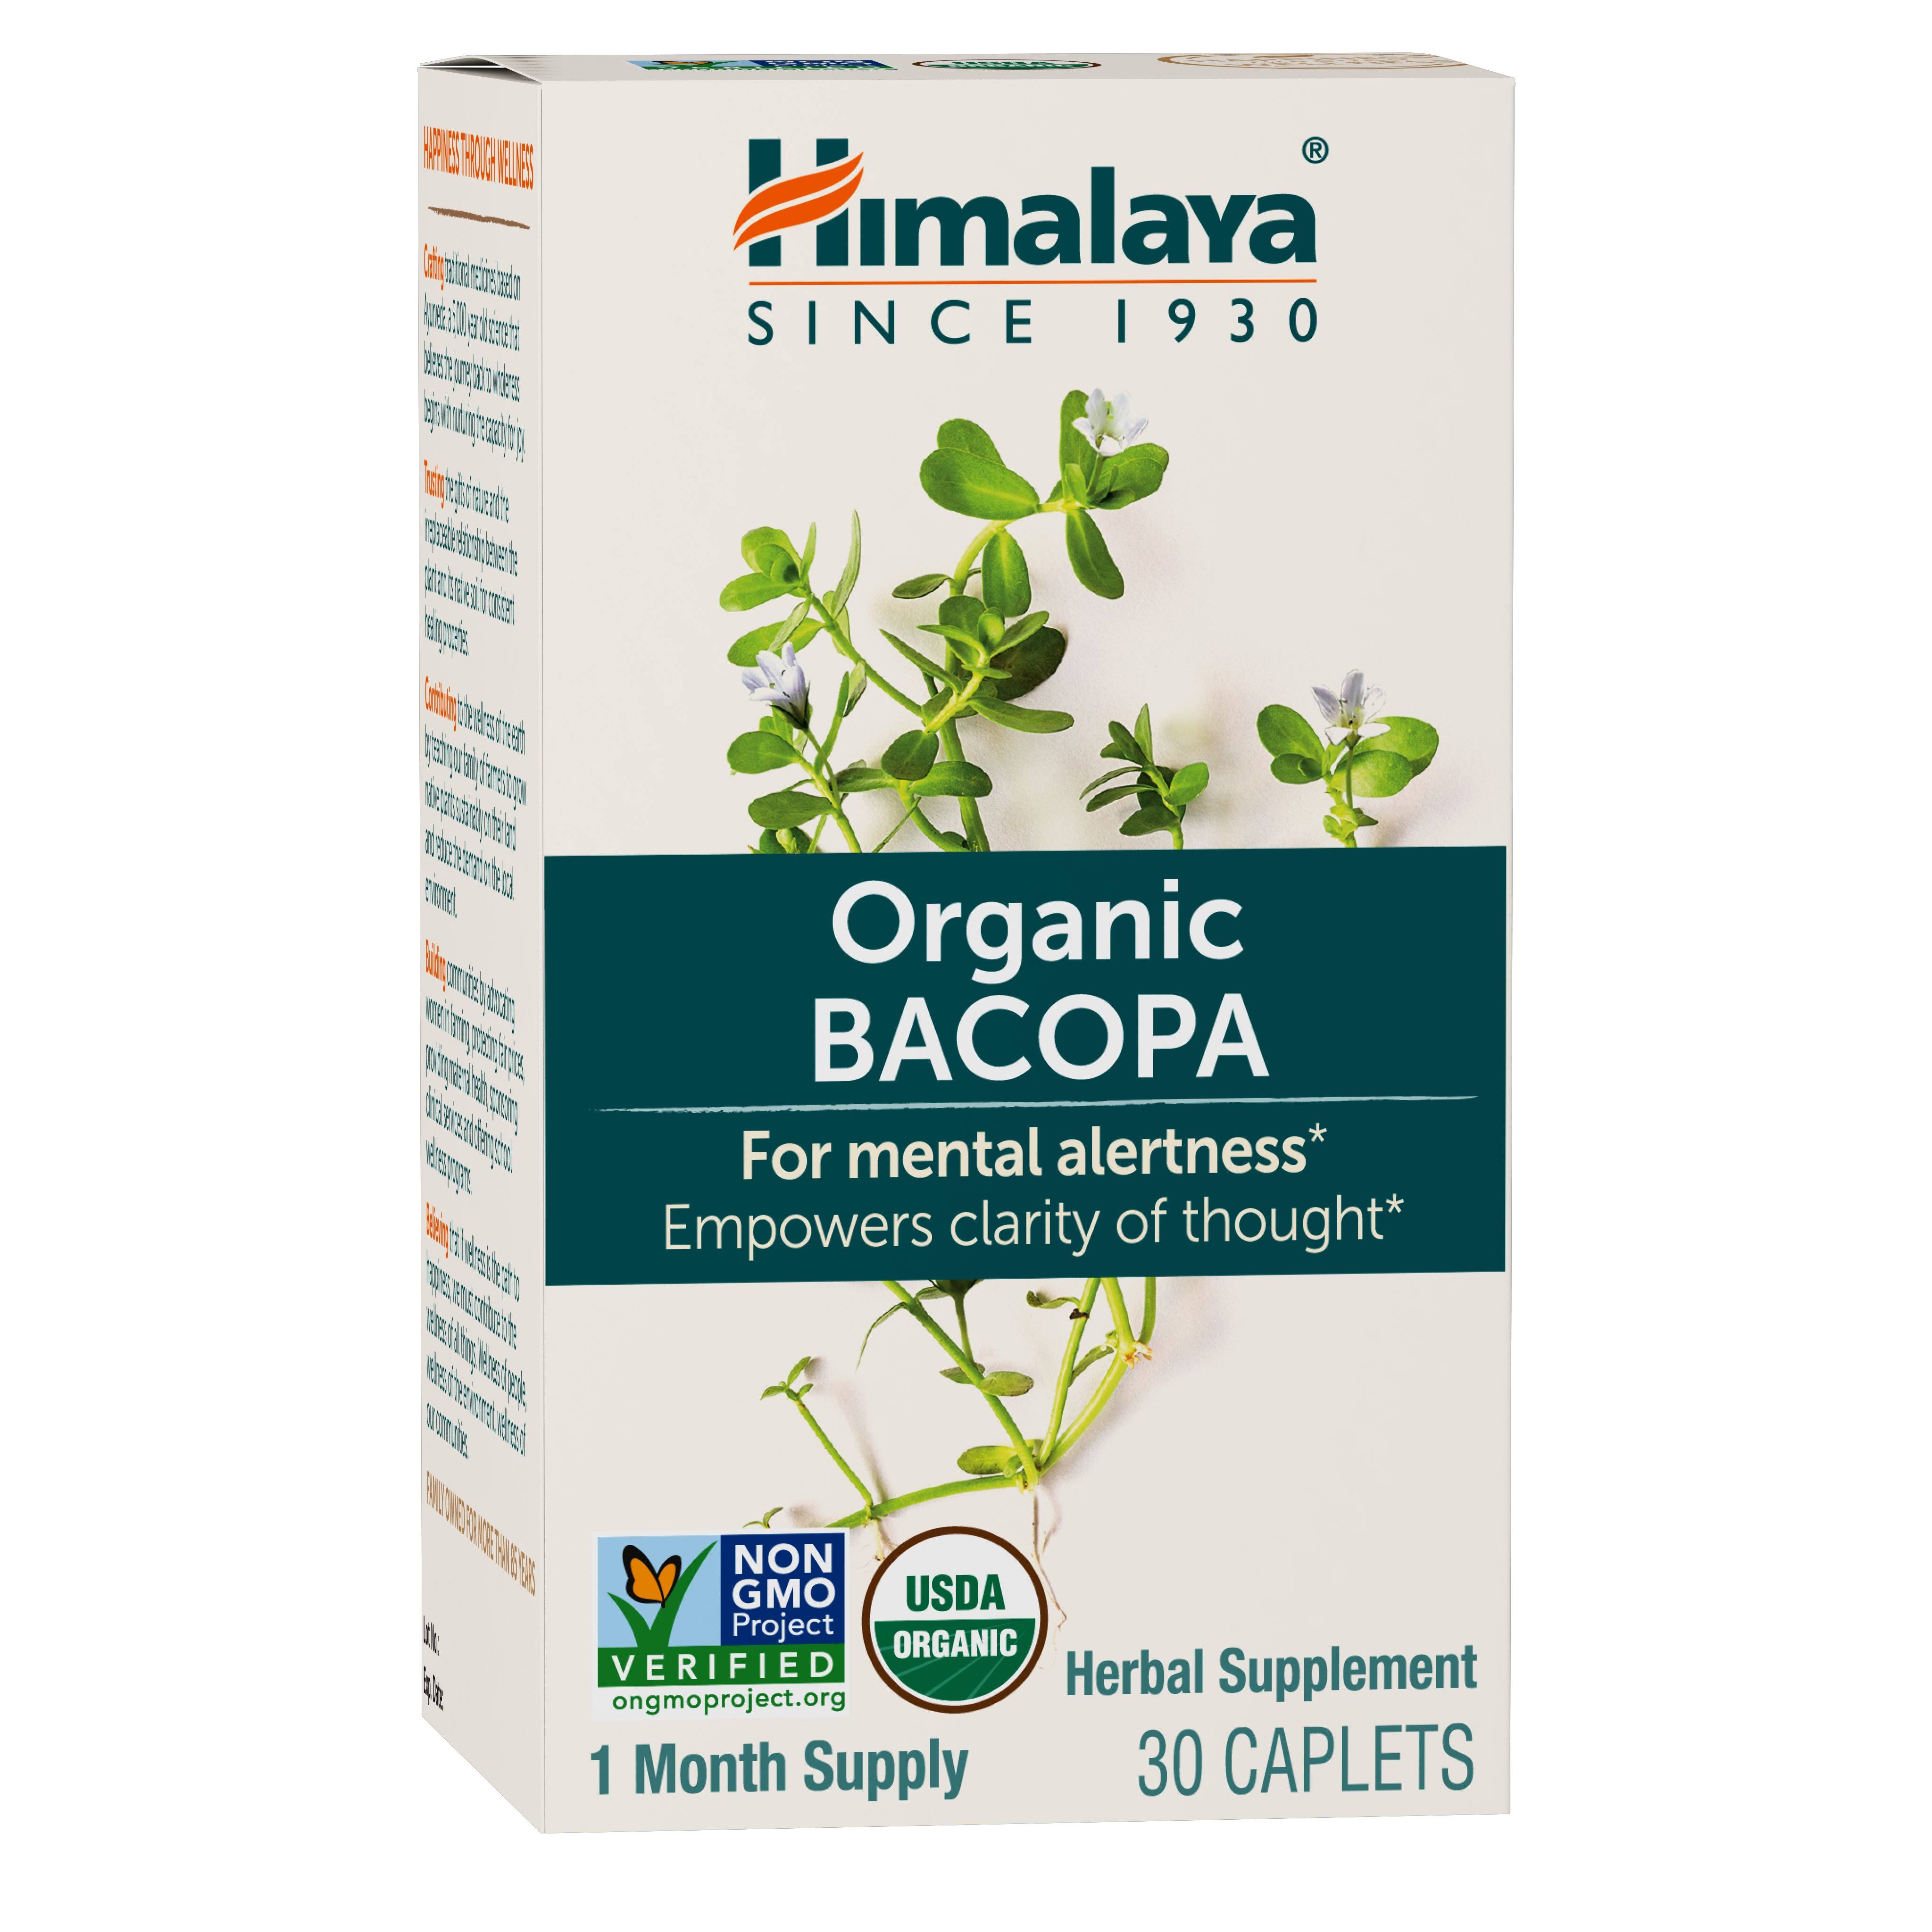 Himalaya Bacopa Memory Support Herbal Supplement - 30 Caplets